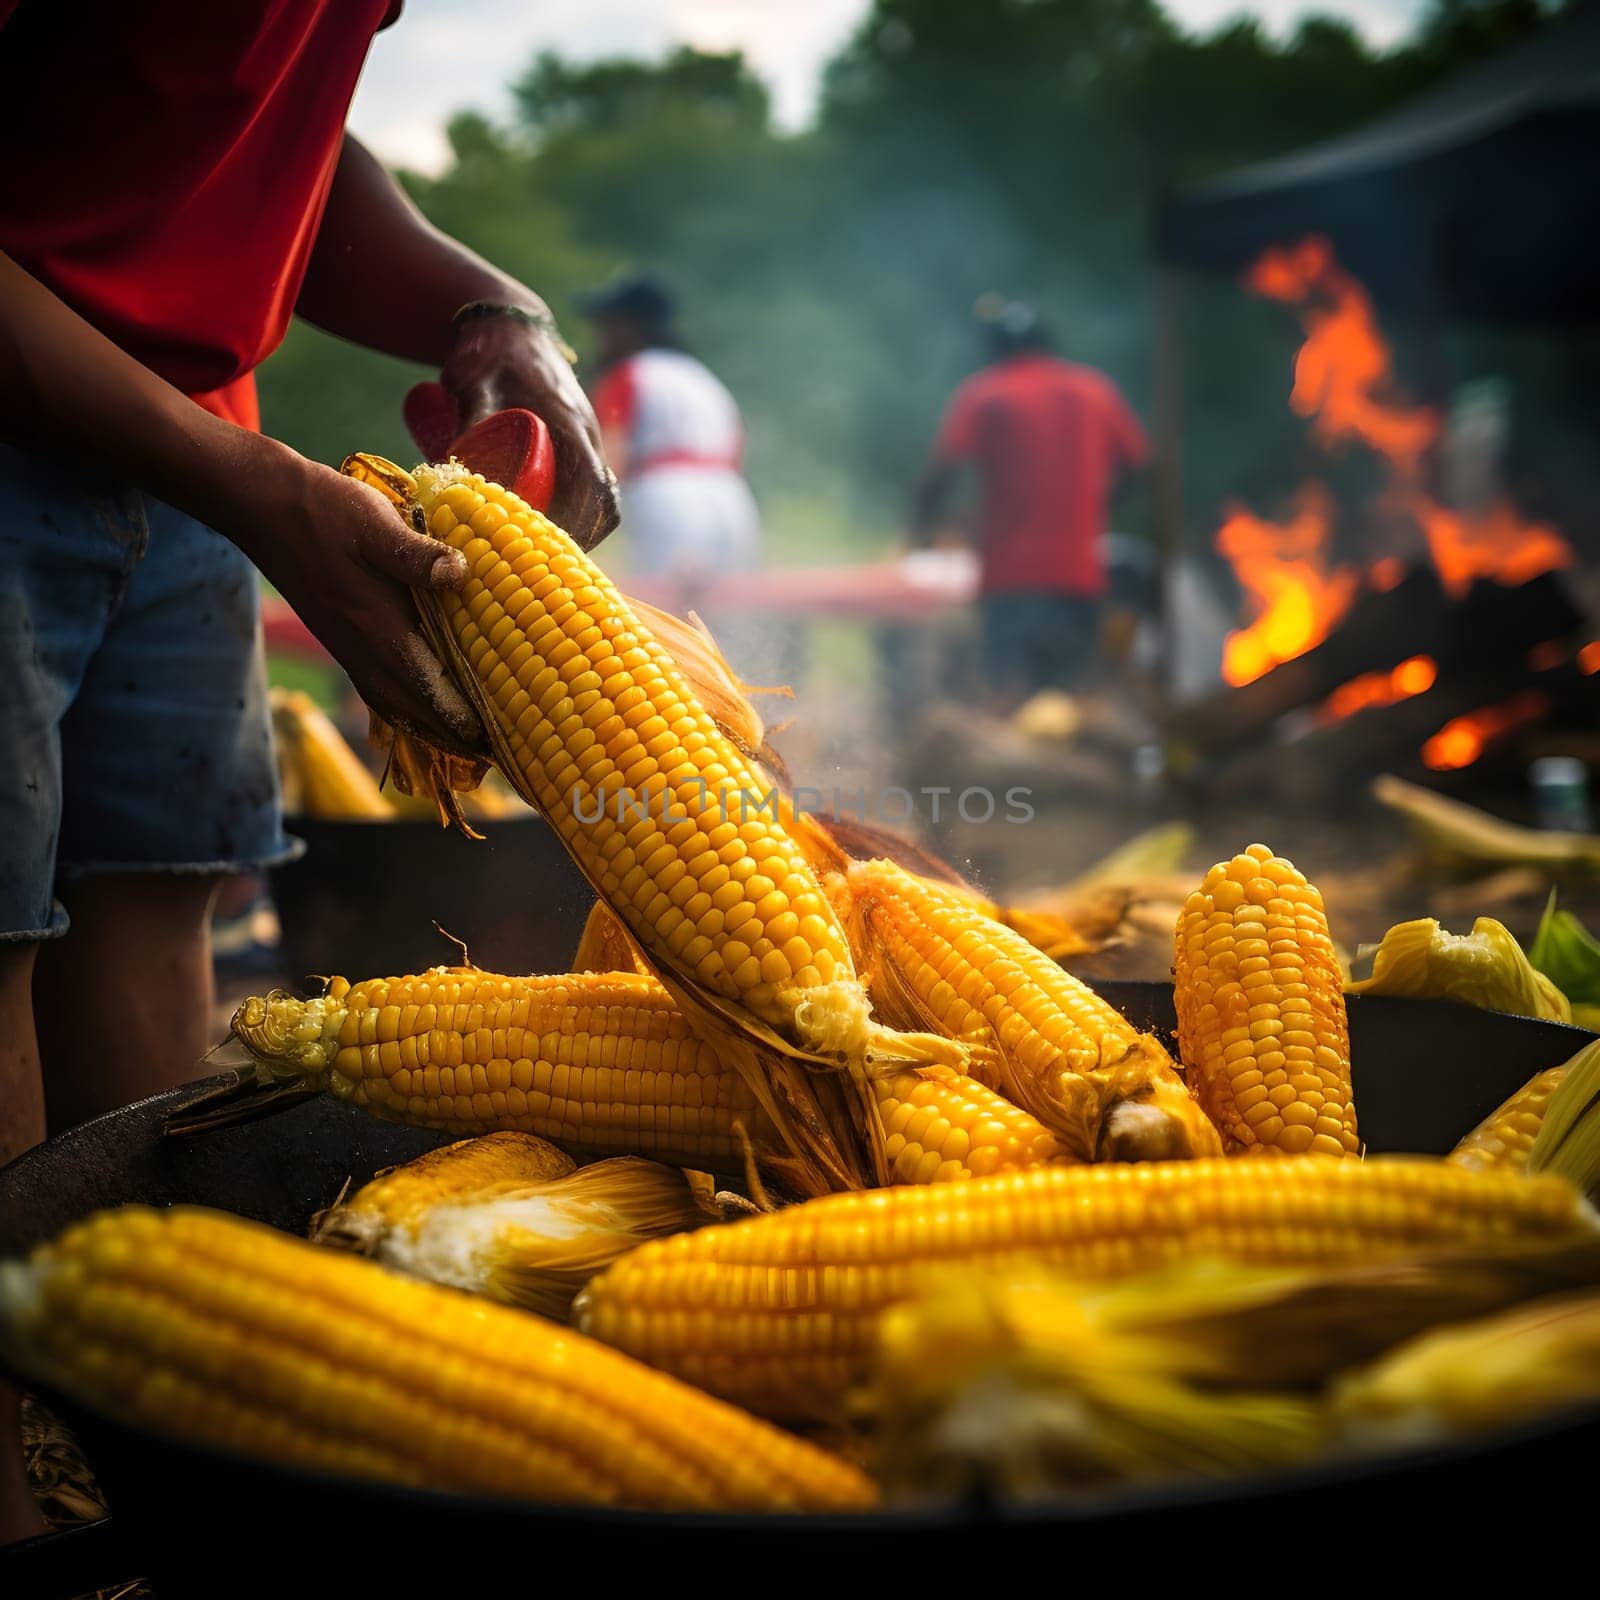 A large metal bowl with cobs, corn and a man and receiving. Corn as a dish of thanksgiving for the harvest. An atmosphere of joy and celebration.